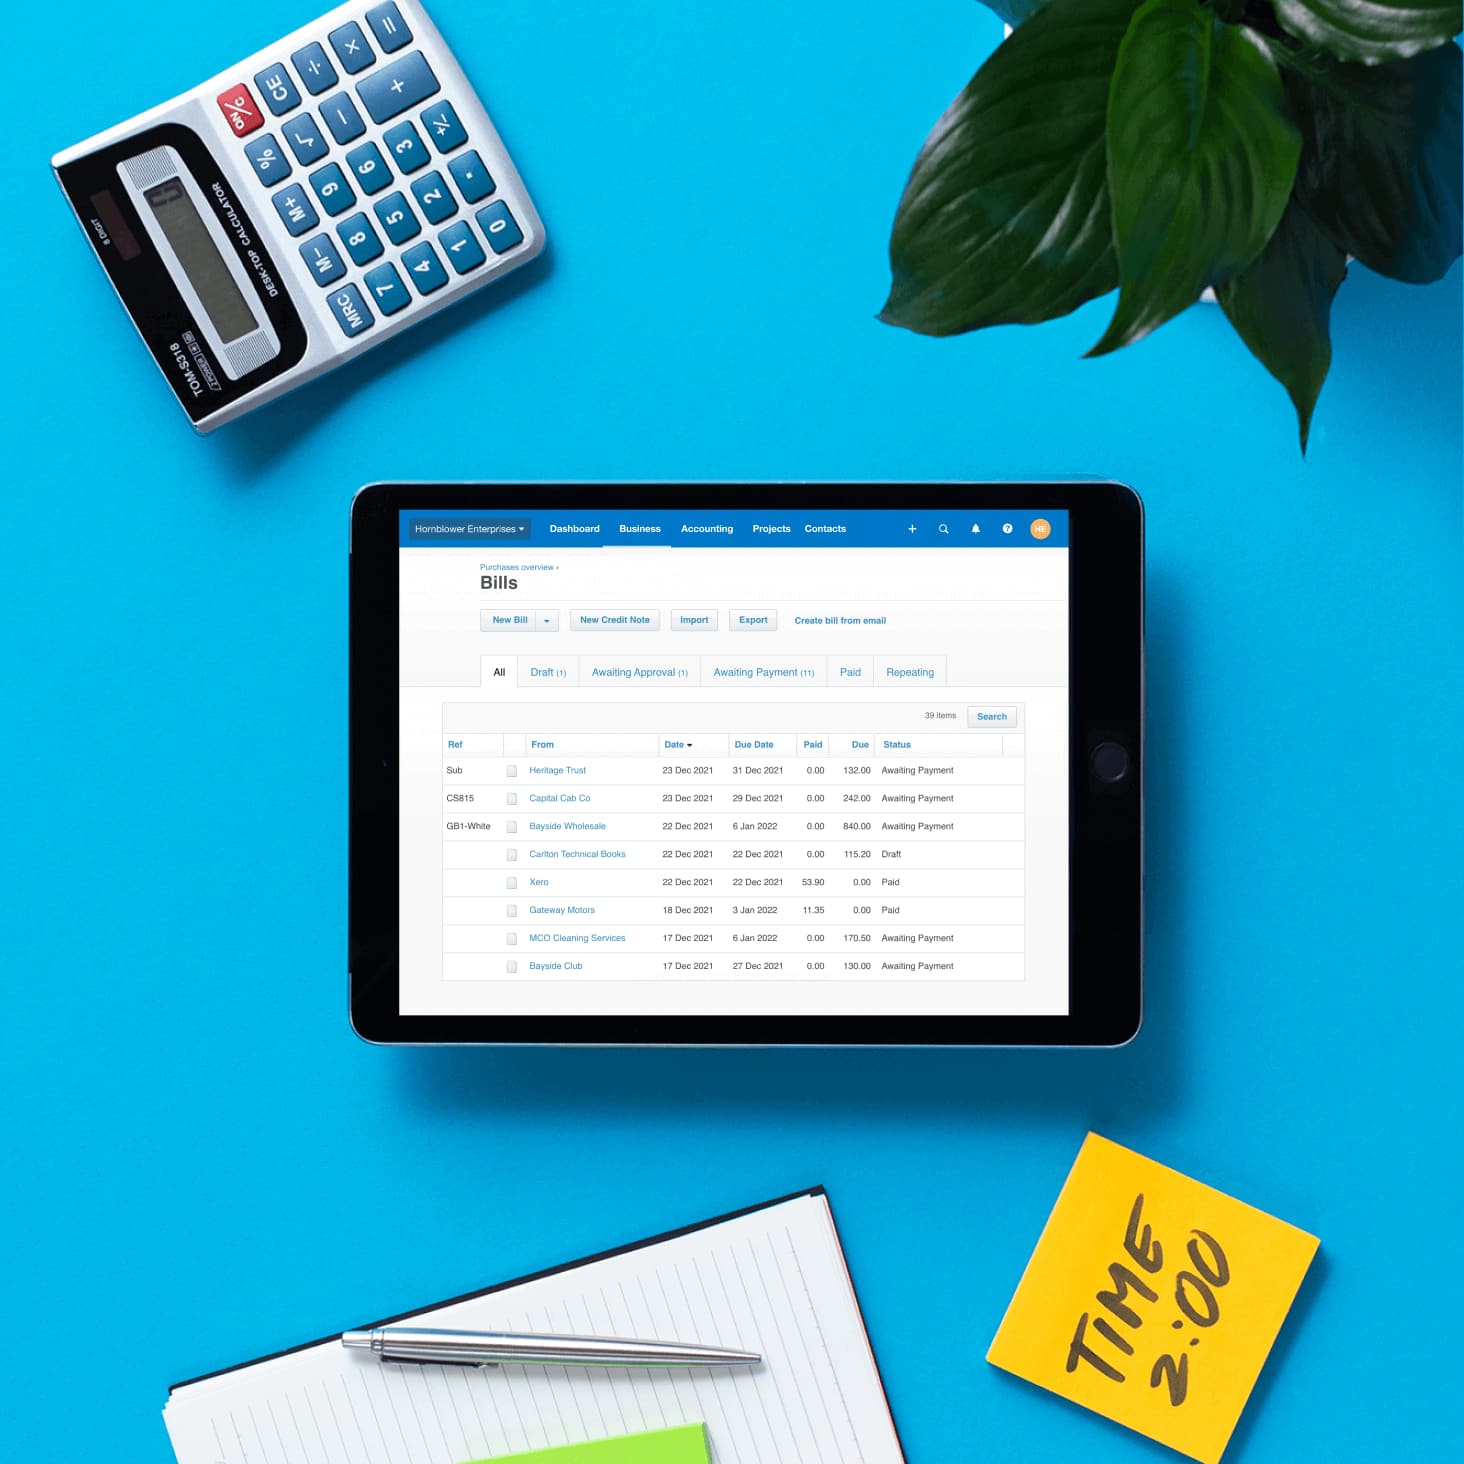 The Bills screen in Xero shows a list of bills, including e-invoices received as draft bills ready to be approved and paid.